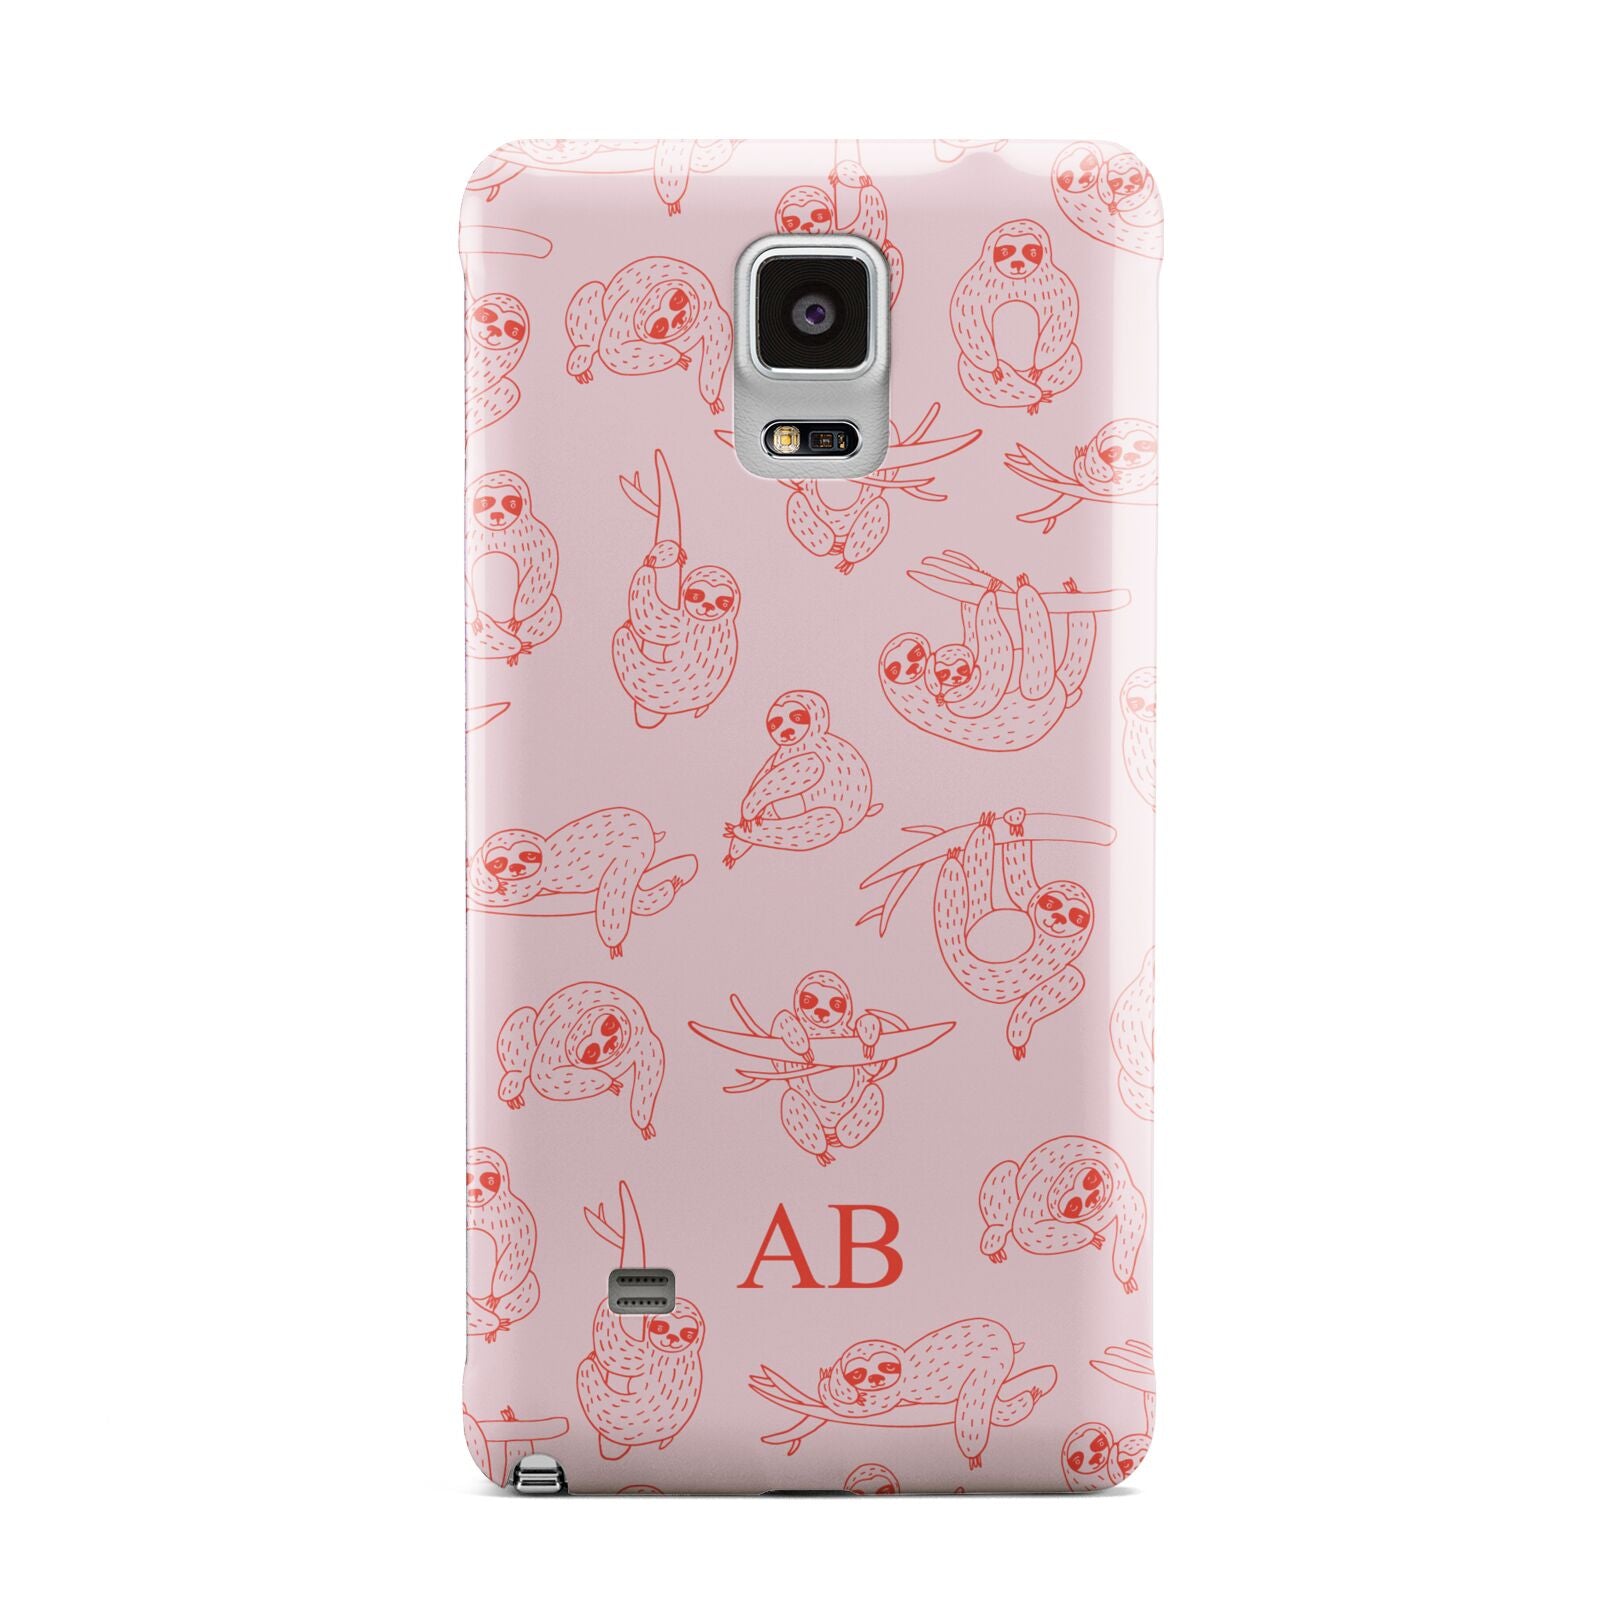 Customised Sloth Samsung Galaxy Note 4 Case